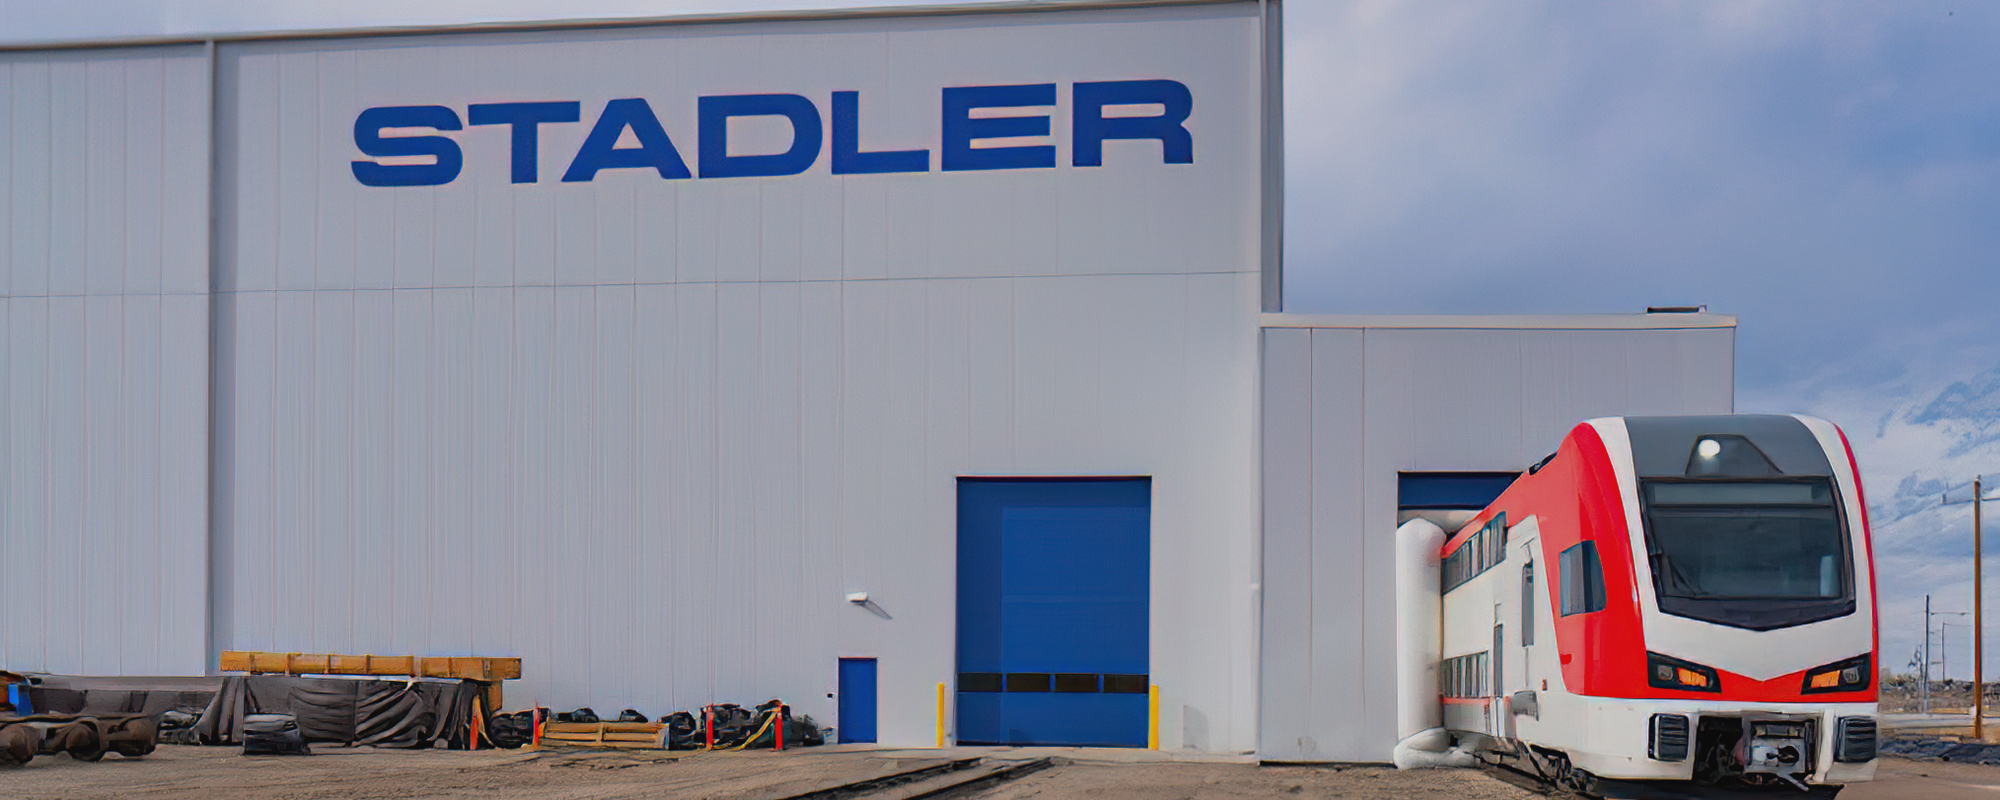 Featured image for “Stadler: Full Speed Ahead”